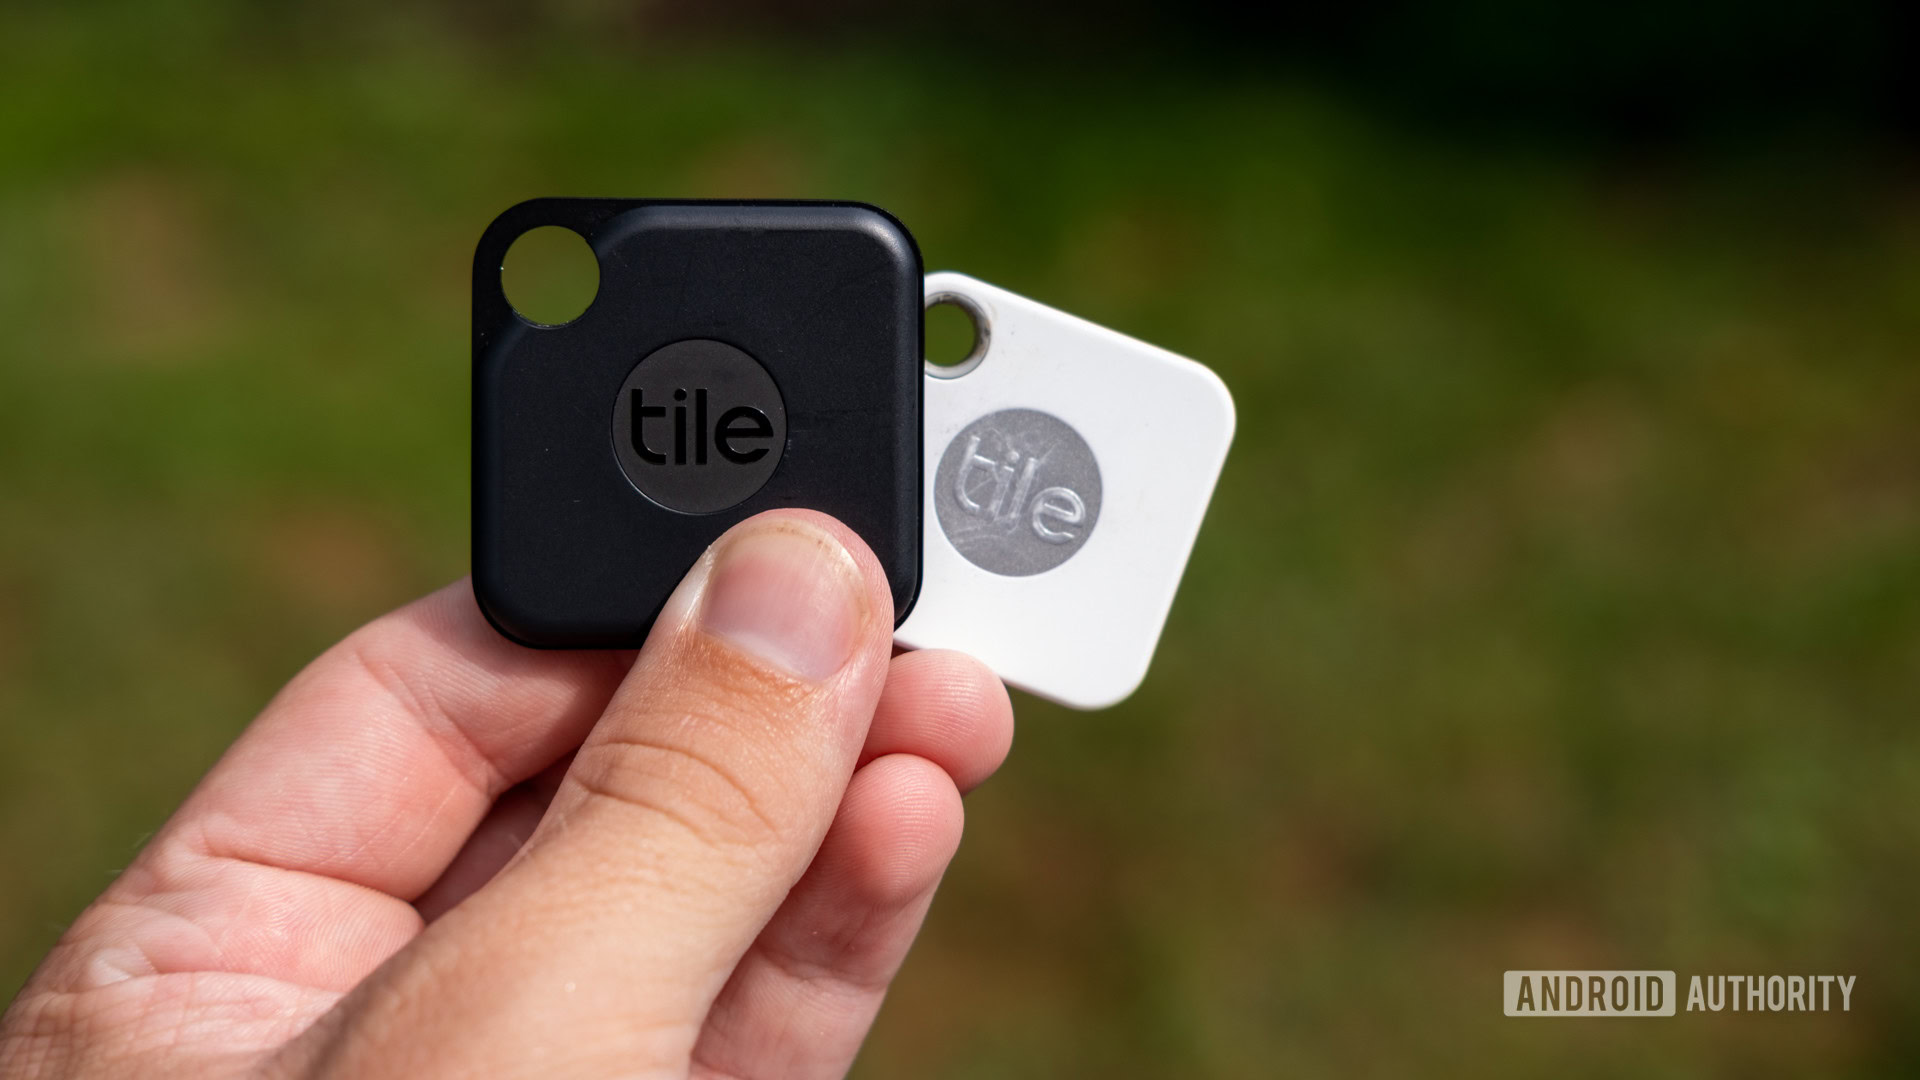 Tile Pro review: The bluetooth tracker that's built to last